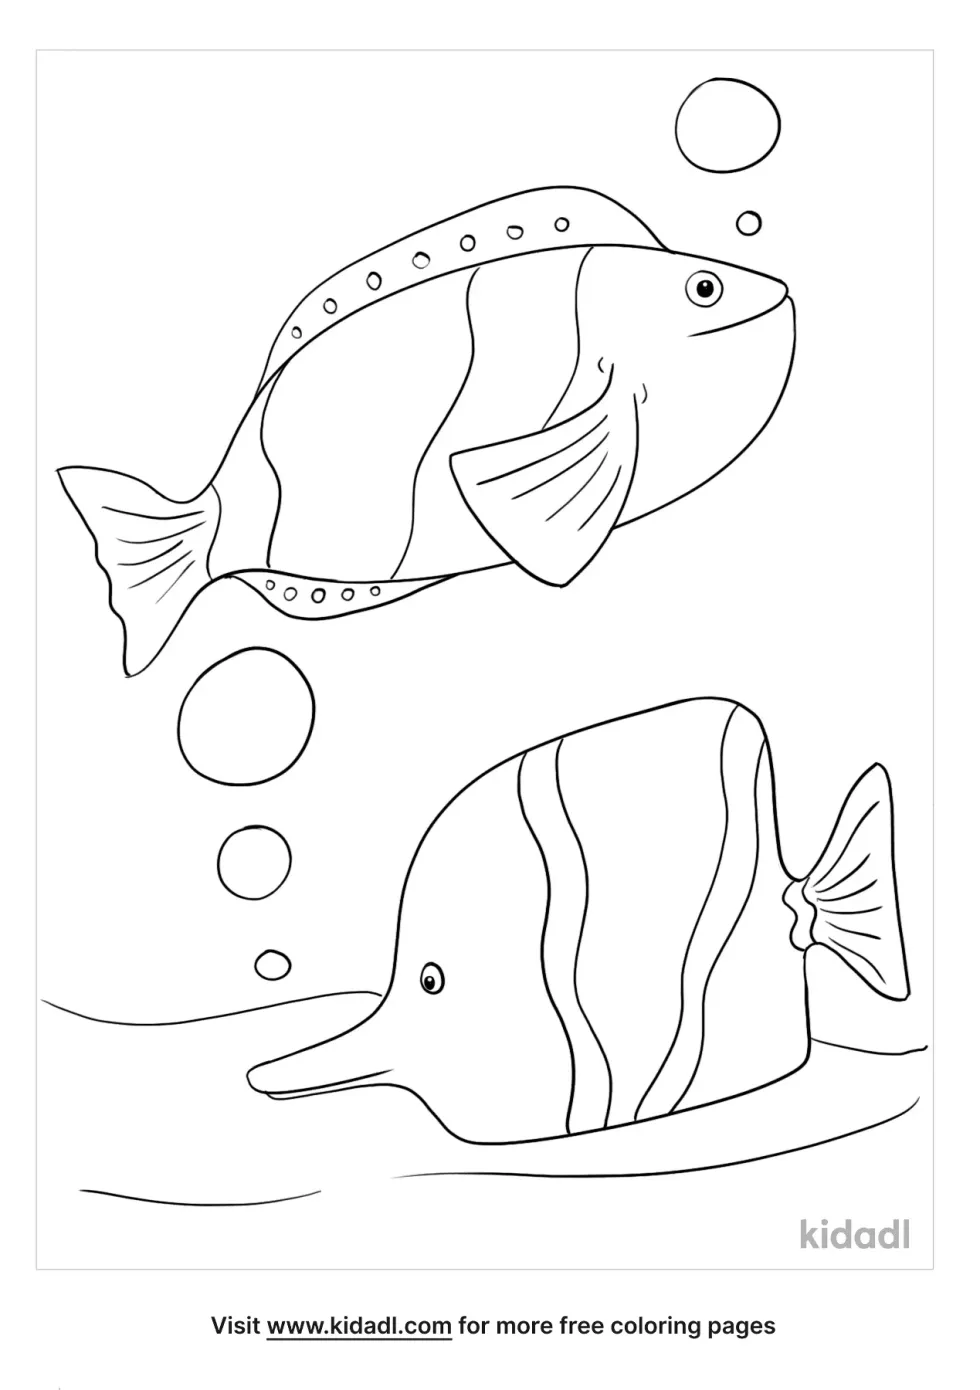 2 Fish Coloring Page